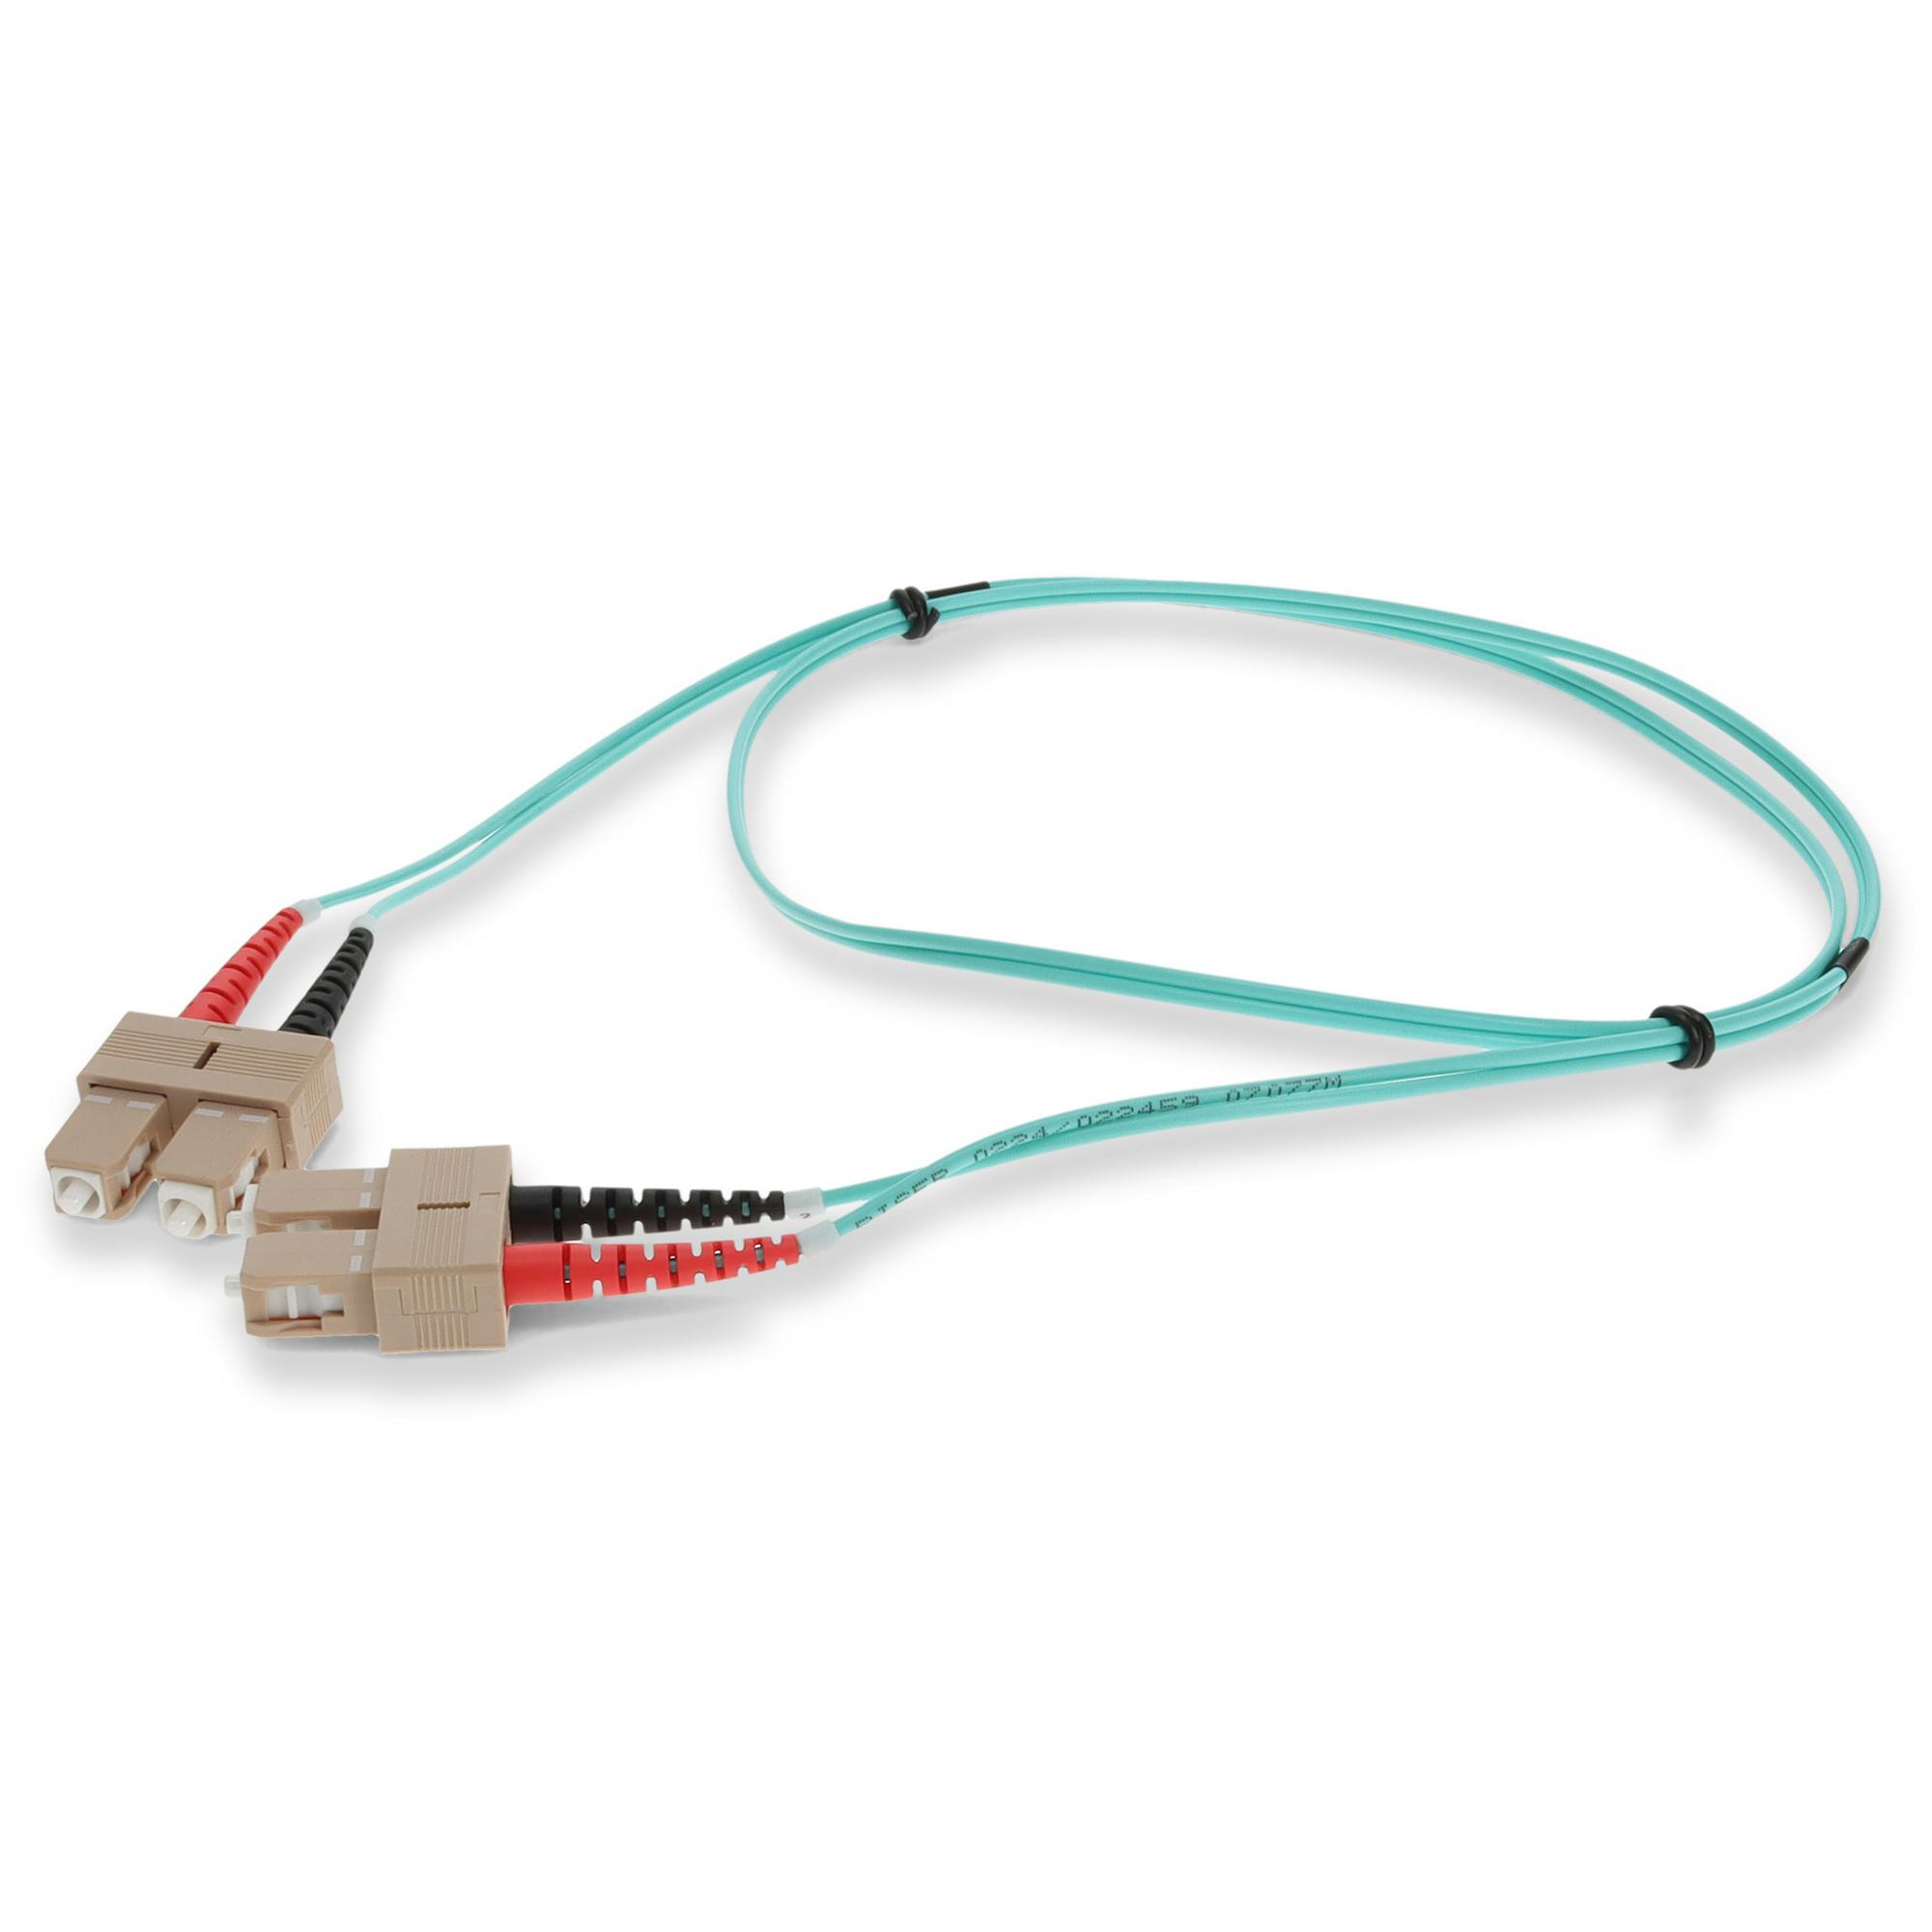 ADD-MPOMPO-5M5OM3 Add-On Computer 5m MPO/MPO Female to Female Crossover OM3 LOMM Patch Cable